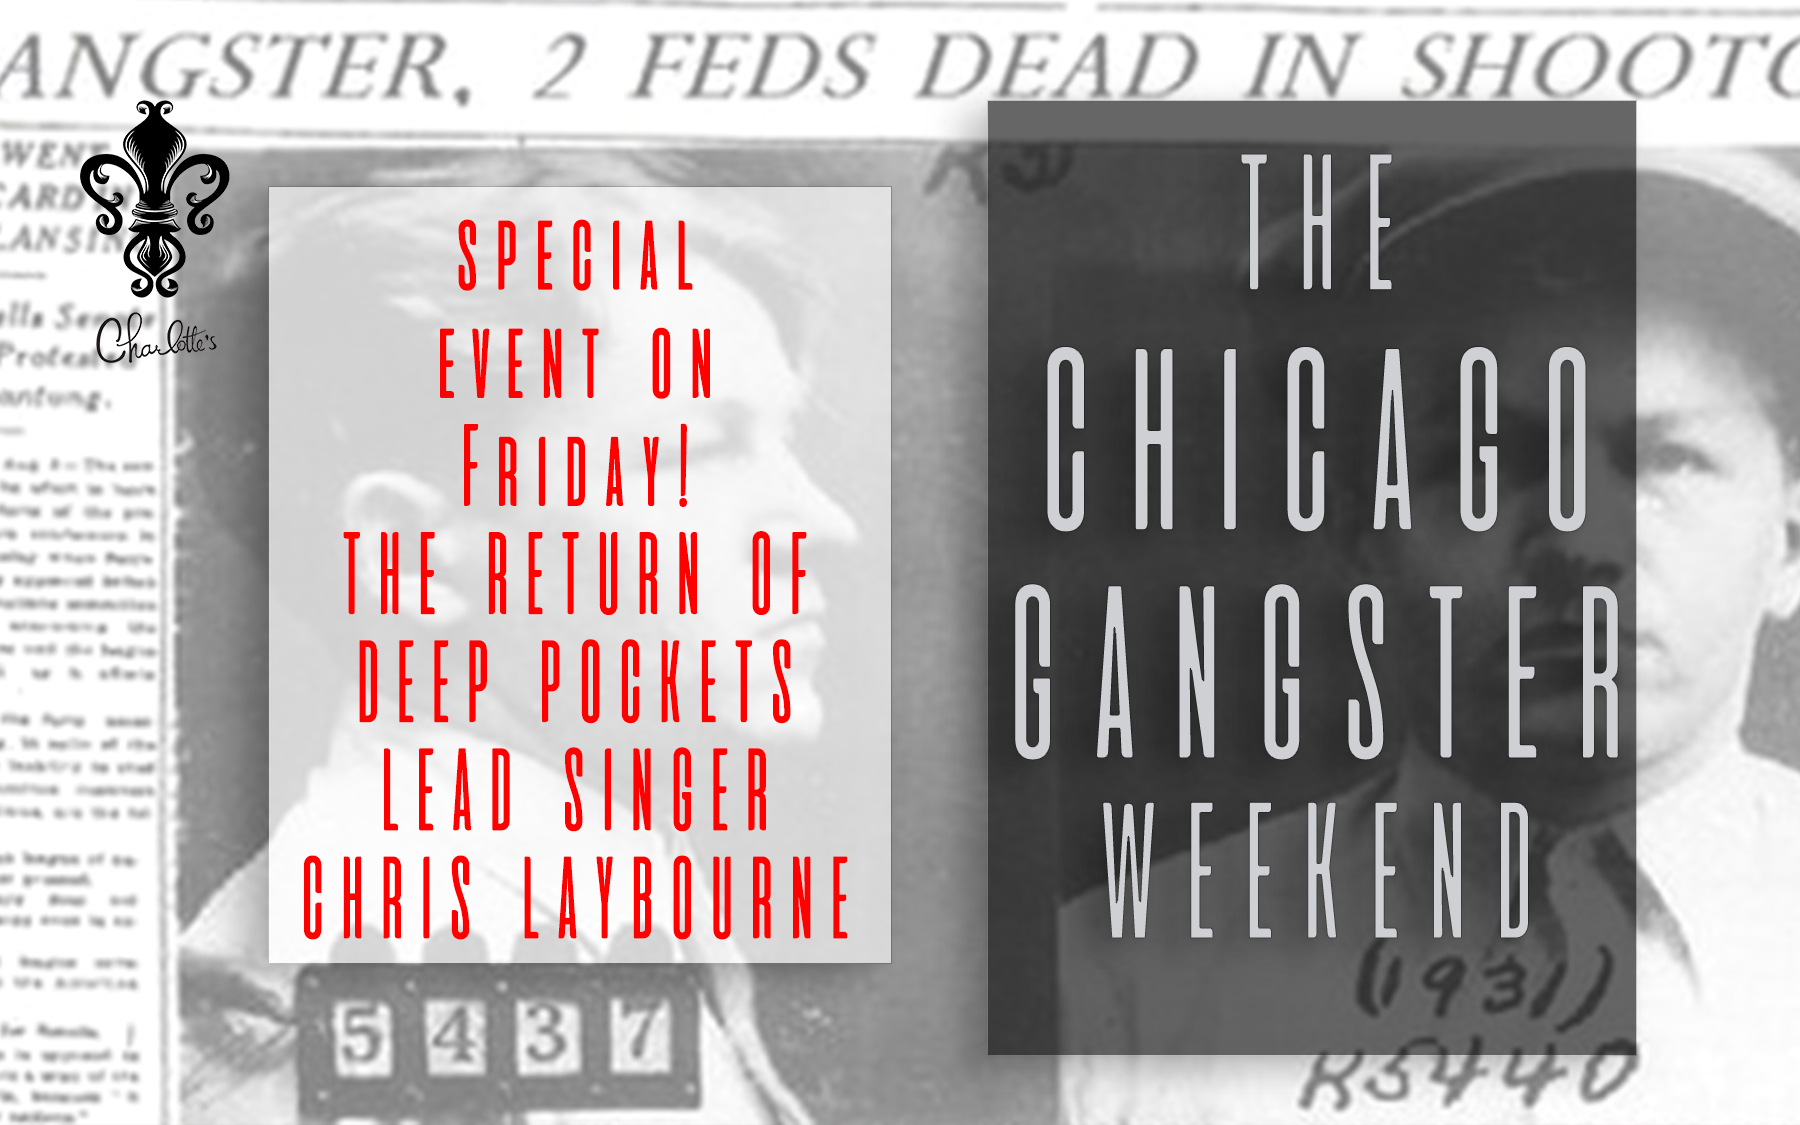 The Chicago Gangster Weekend